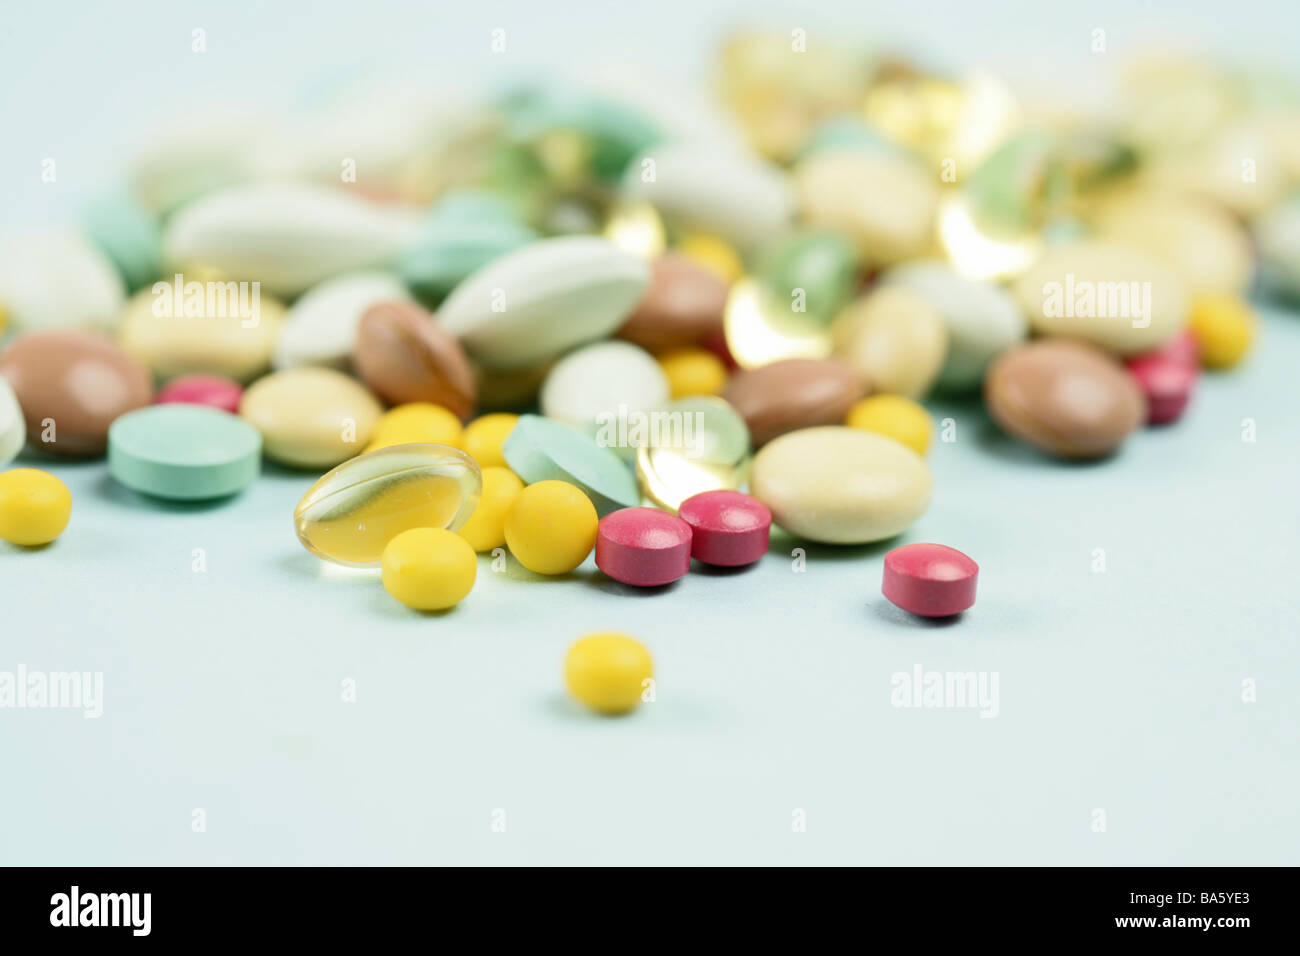 Medication differently series medicine drug pills pill pills capsules different mixed colorfully selection variety symbol Stock Photo